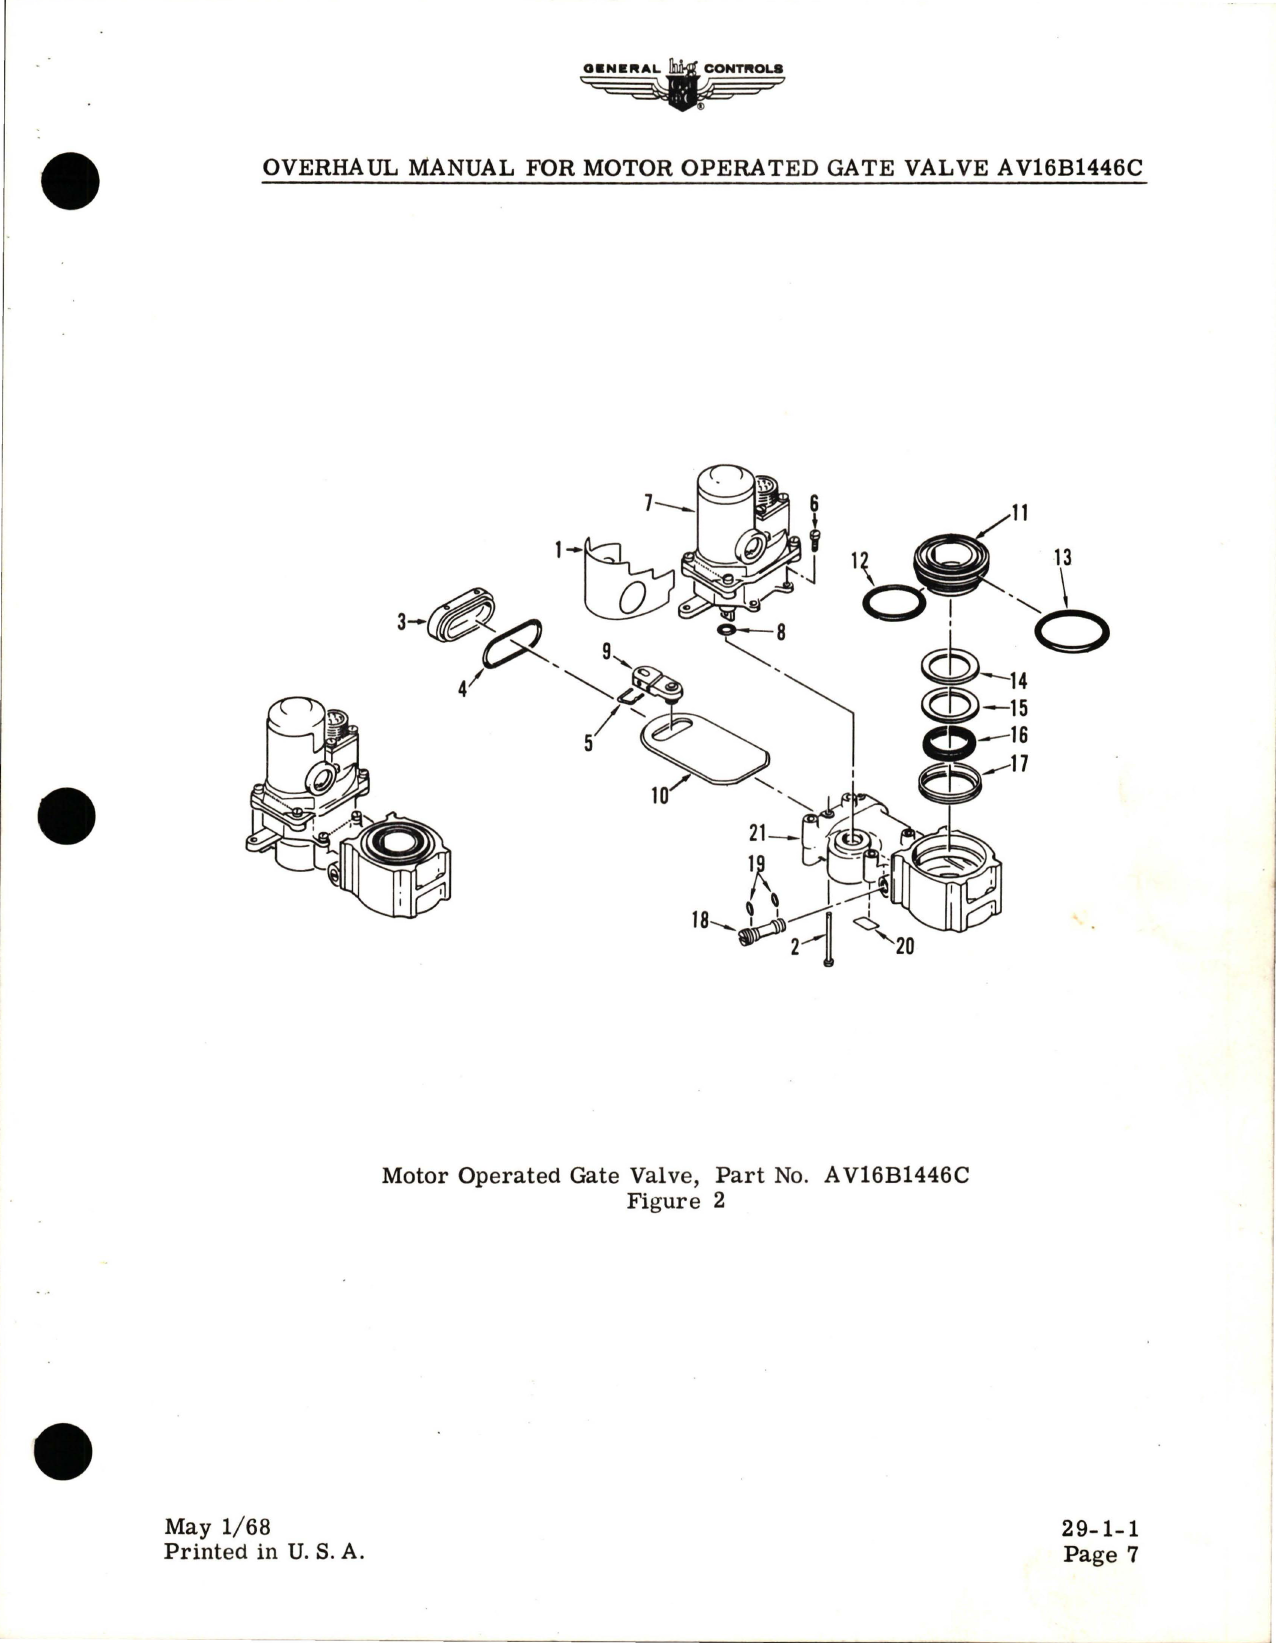 Sample page 9 from AirCorps Library document: Overhaul Manual with Parts Catalog for Motor Operated Gate Valve - AV16B1446C 